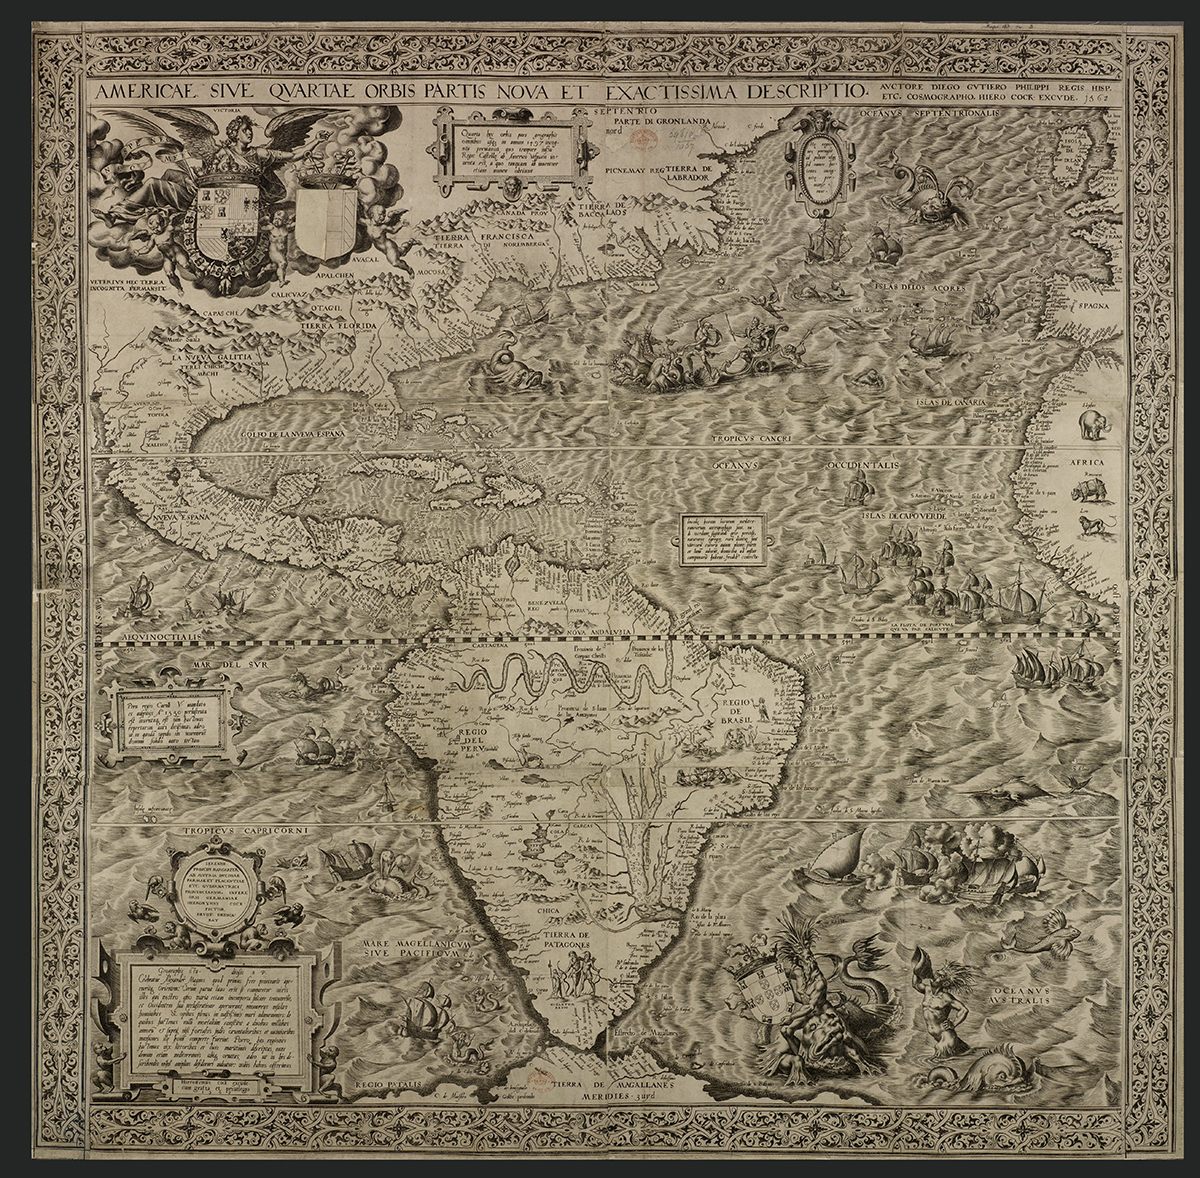 In 1562 Map-Makers Thought America Was Full of Mermaids, Giants ...